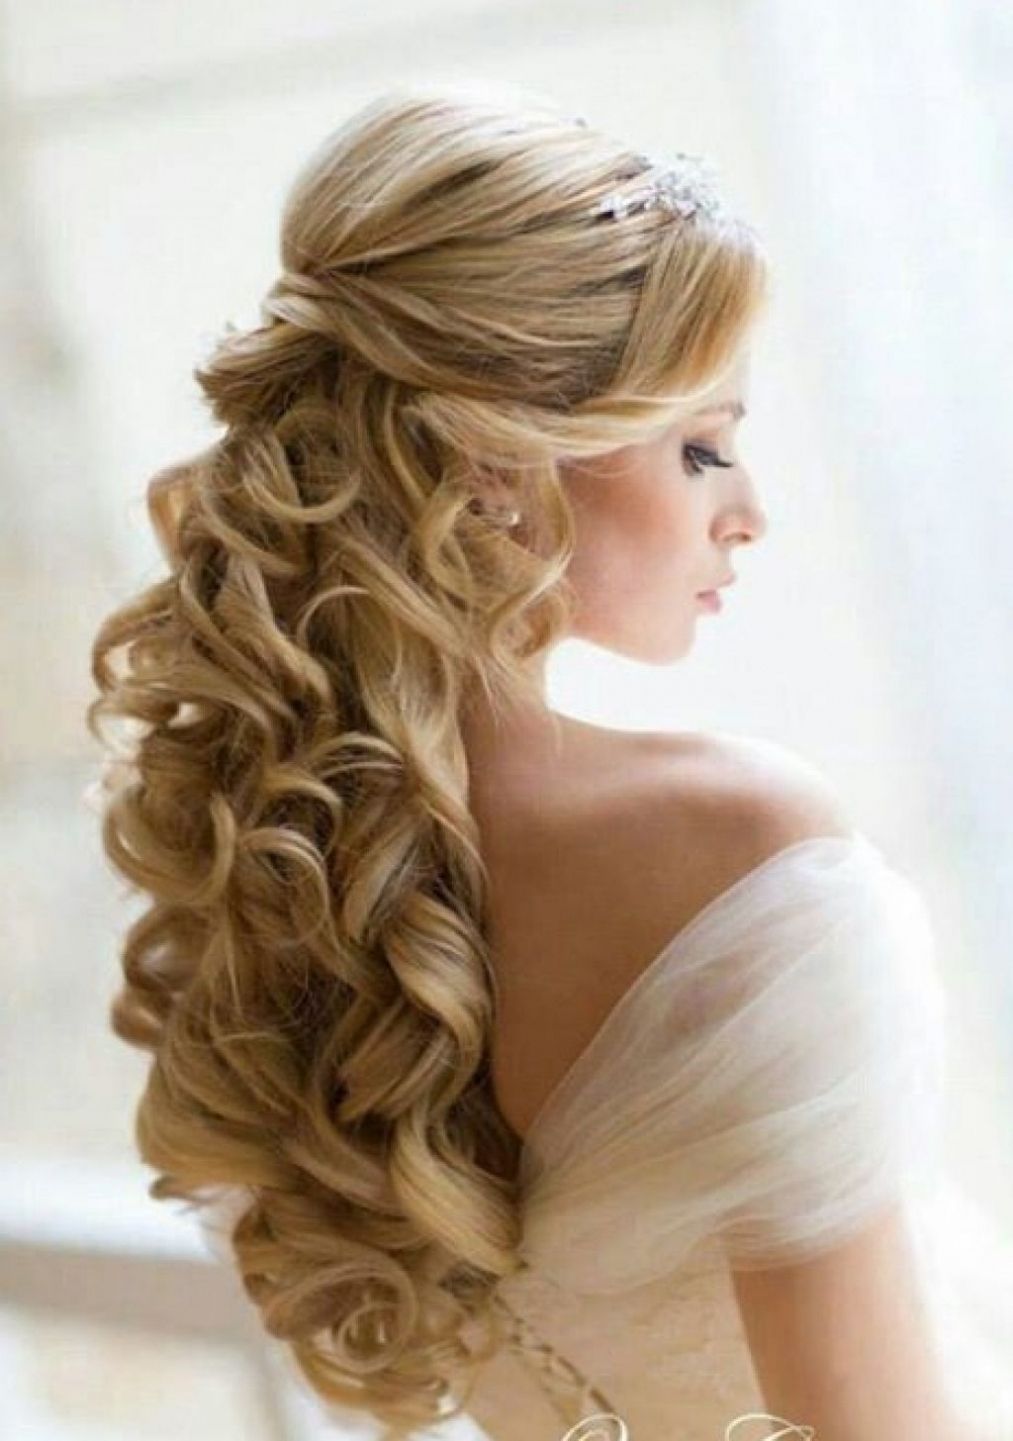 Hairstyles Simple Indian With Open Hair For Weddings 50th Wedding Inside Widely Used Wedding Hairstyles For Open Hair (View 7 of 15)